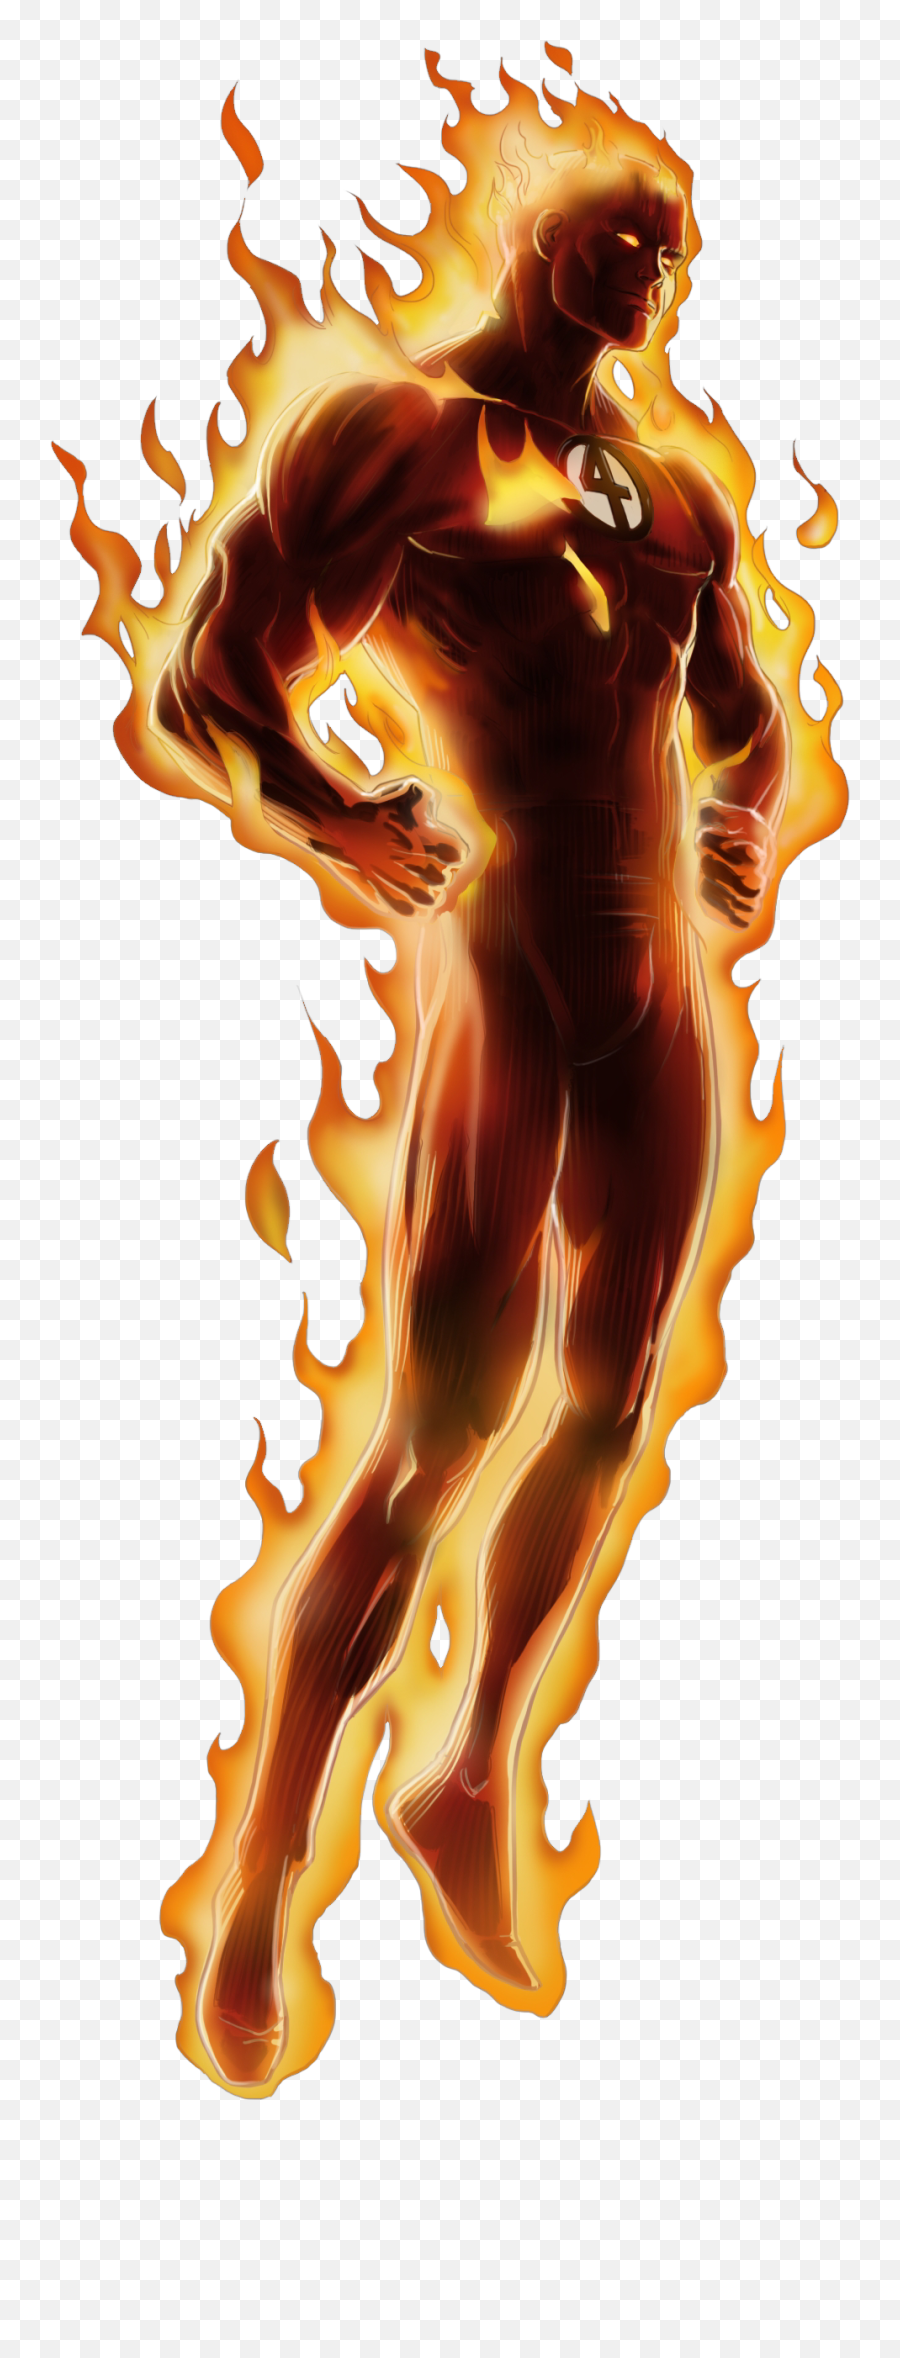 Download Human Torch Png Pic - Free Transparent Png Images Marvel Comics Human Torch,Torch Png